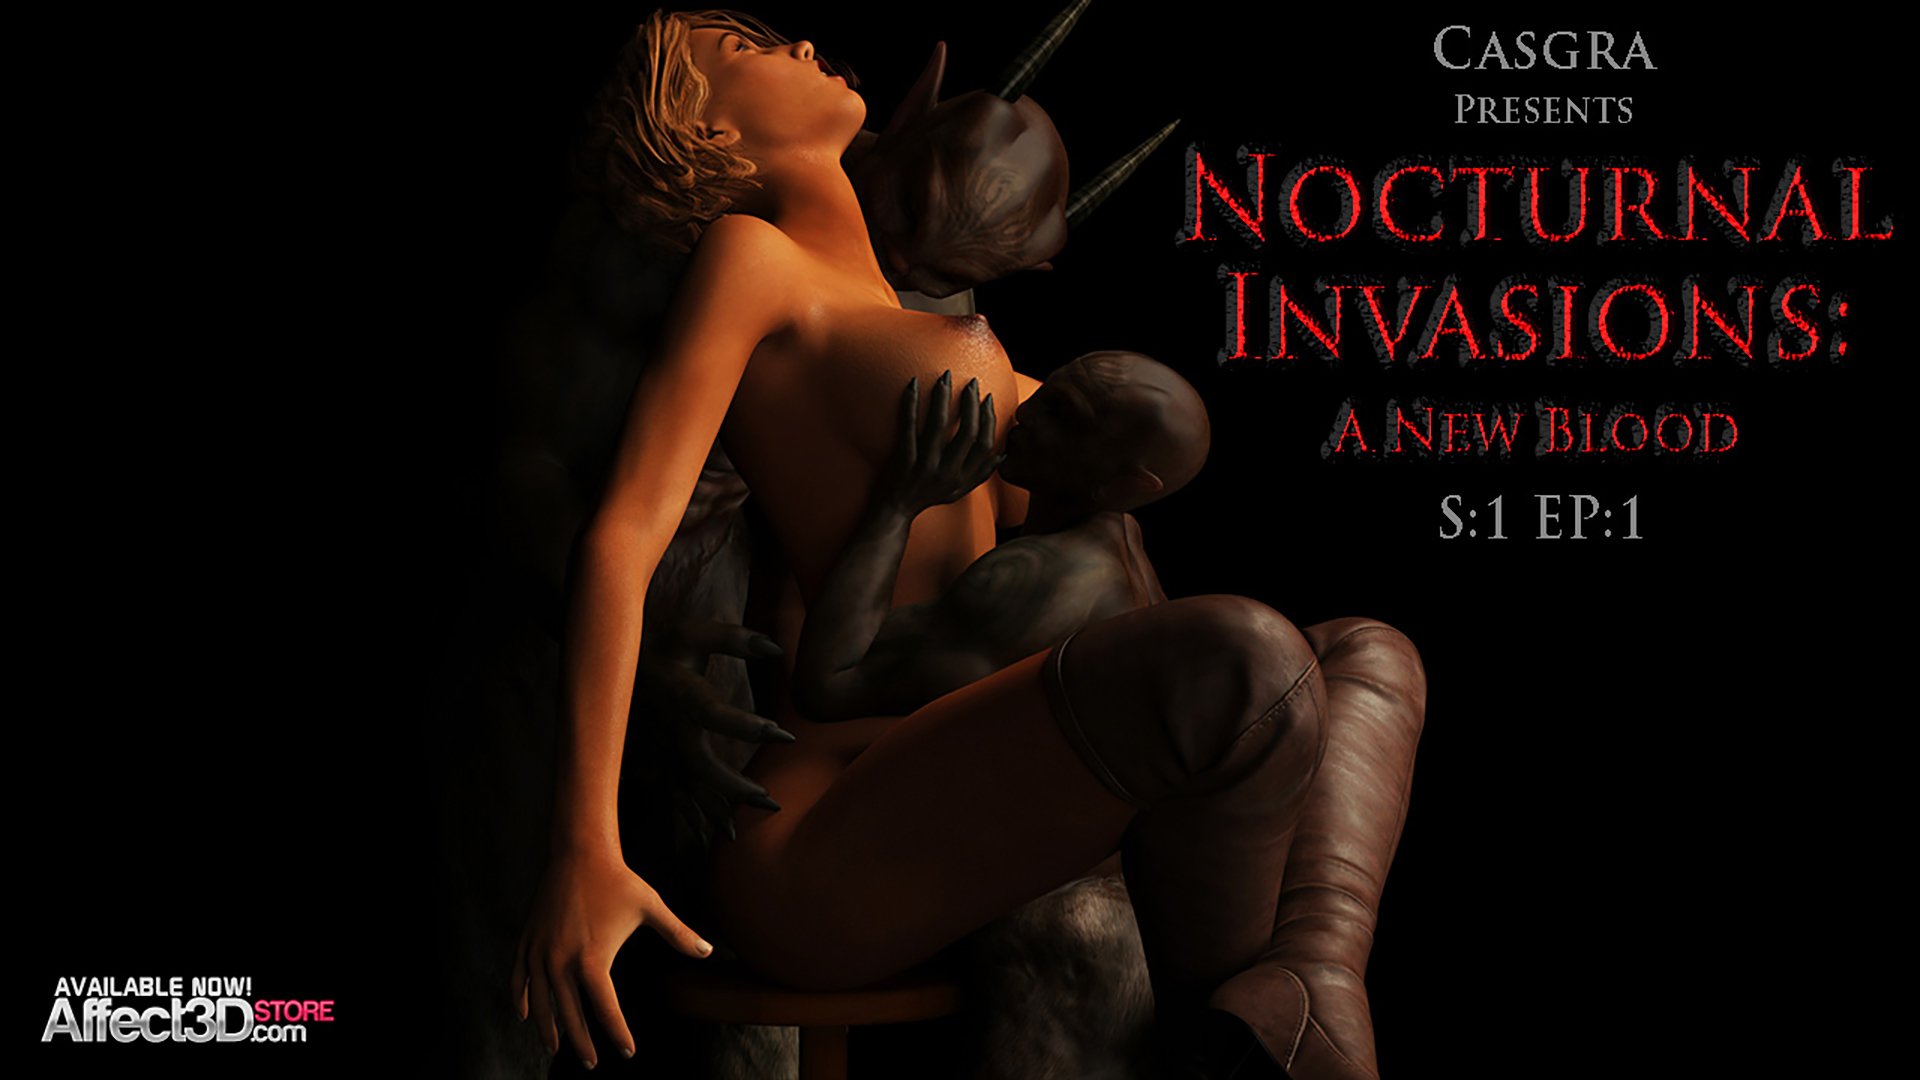 Double Release! Infected 3 and Nocturnal Invasions: A New Blood